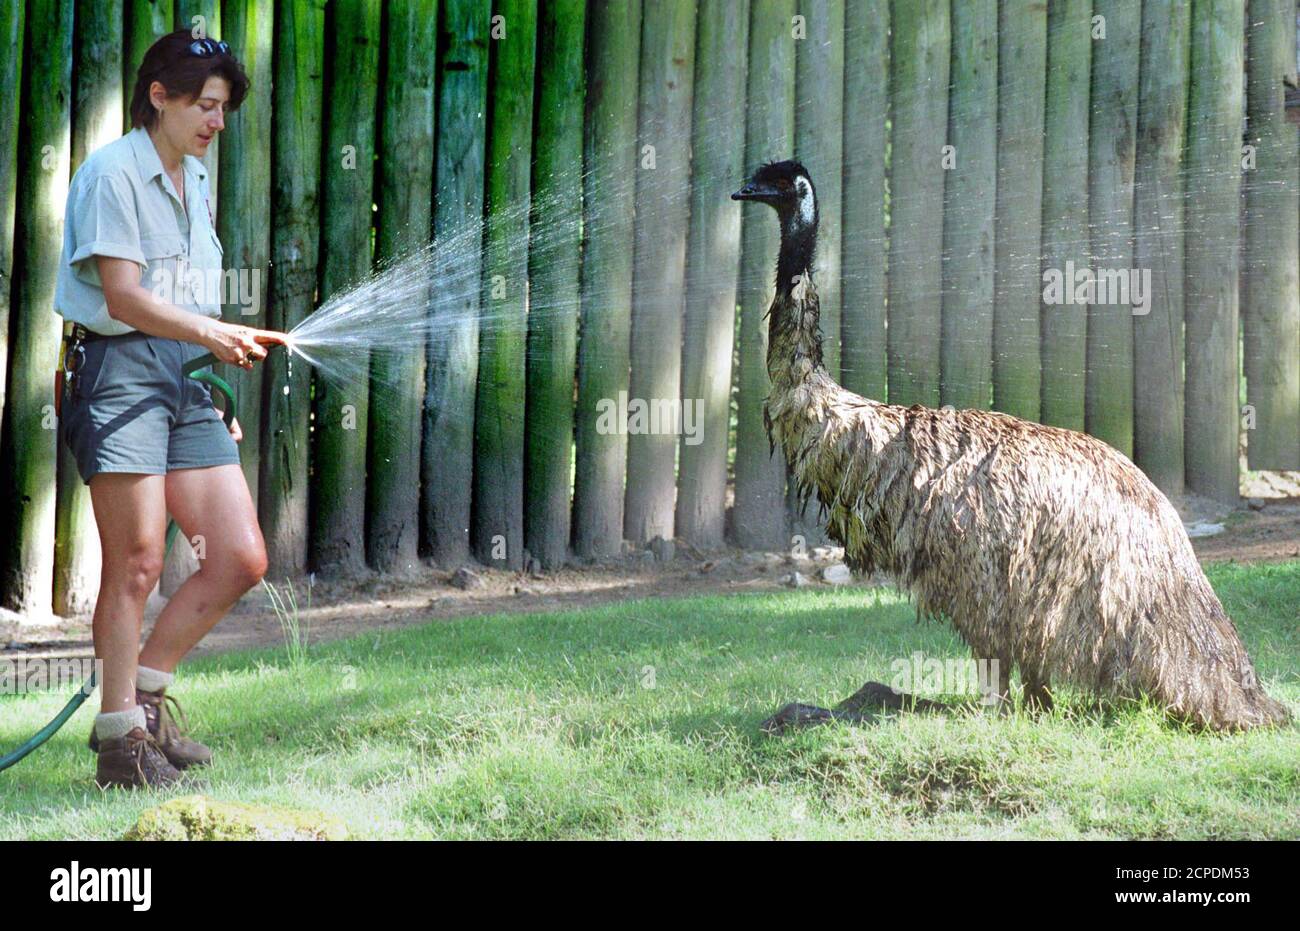 Animal handler Annette Gifford cools down "Dubbo" the emu with an early  morning soaking at Sydney's harbourside Taronga Park Zoo, January 19.  Sydney is expecting a hot summer's day with temperatures to